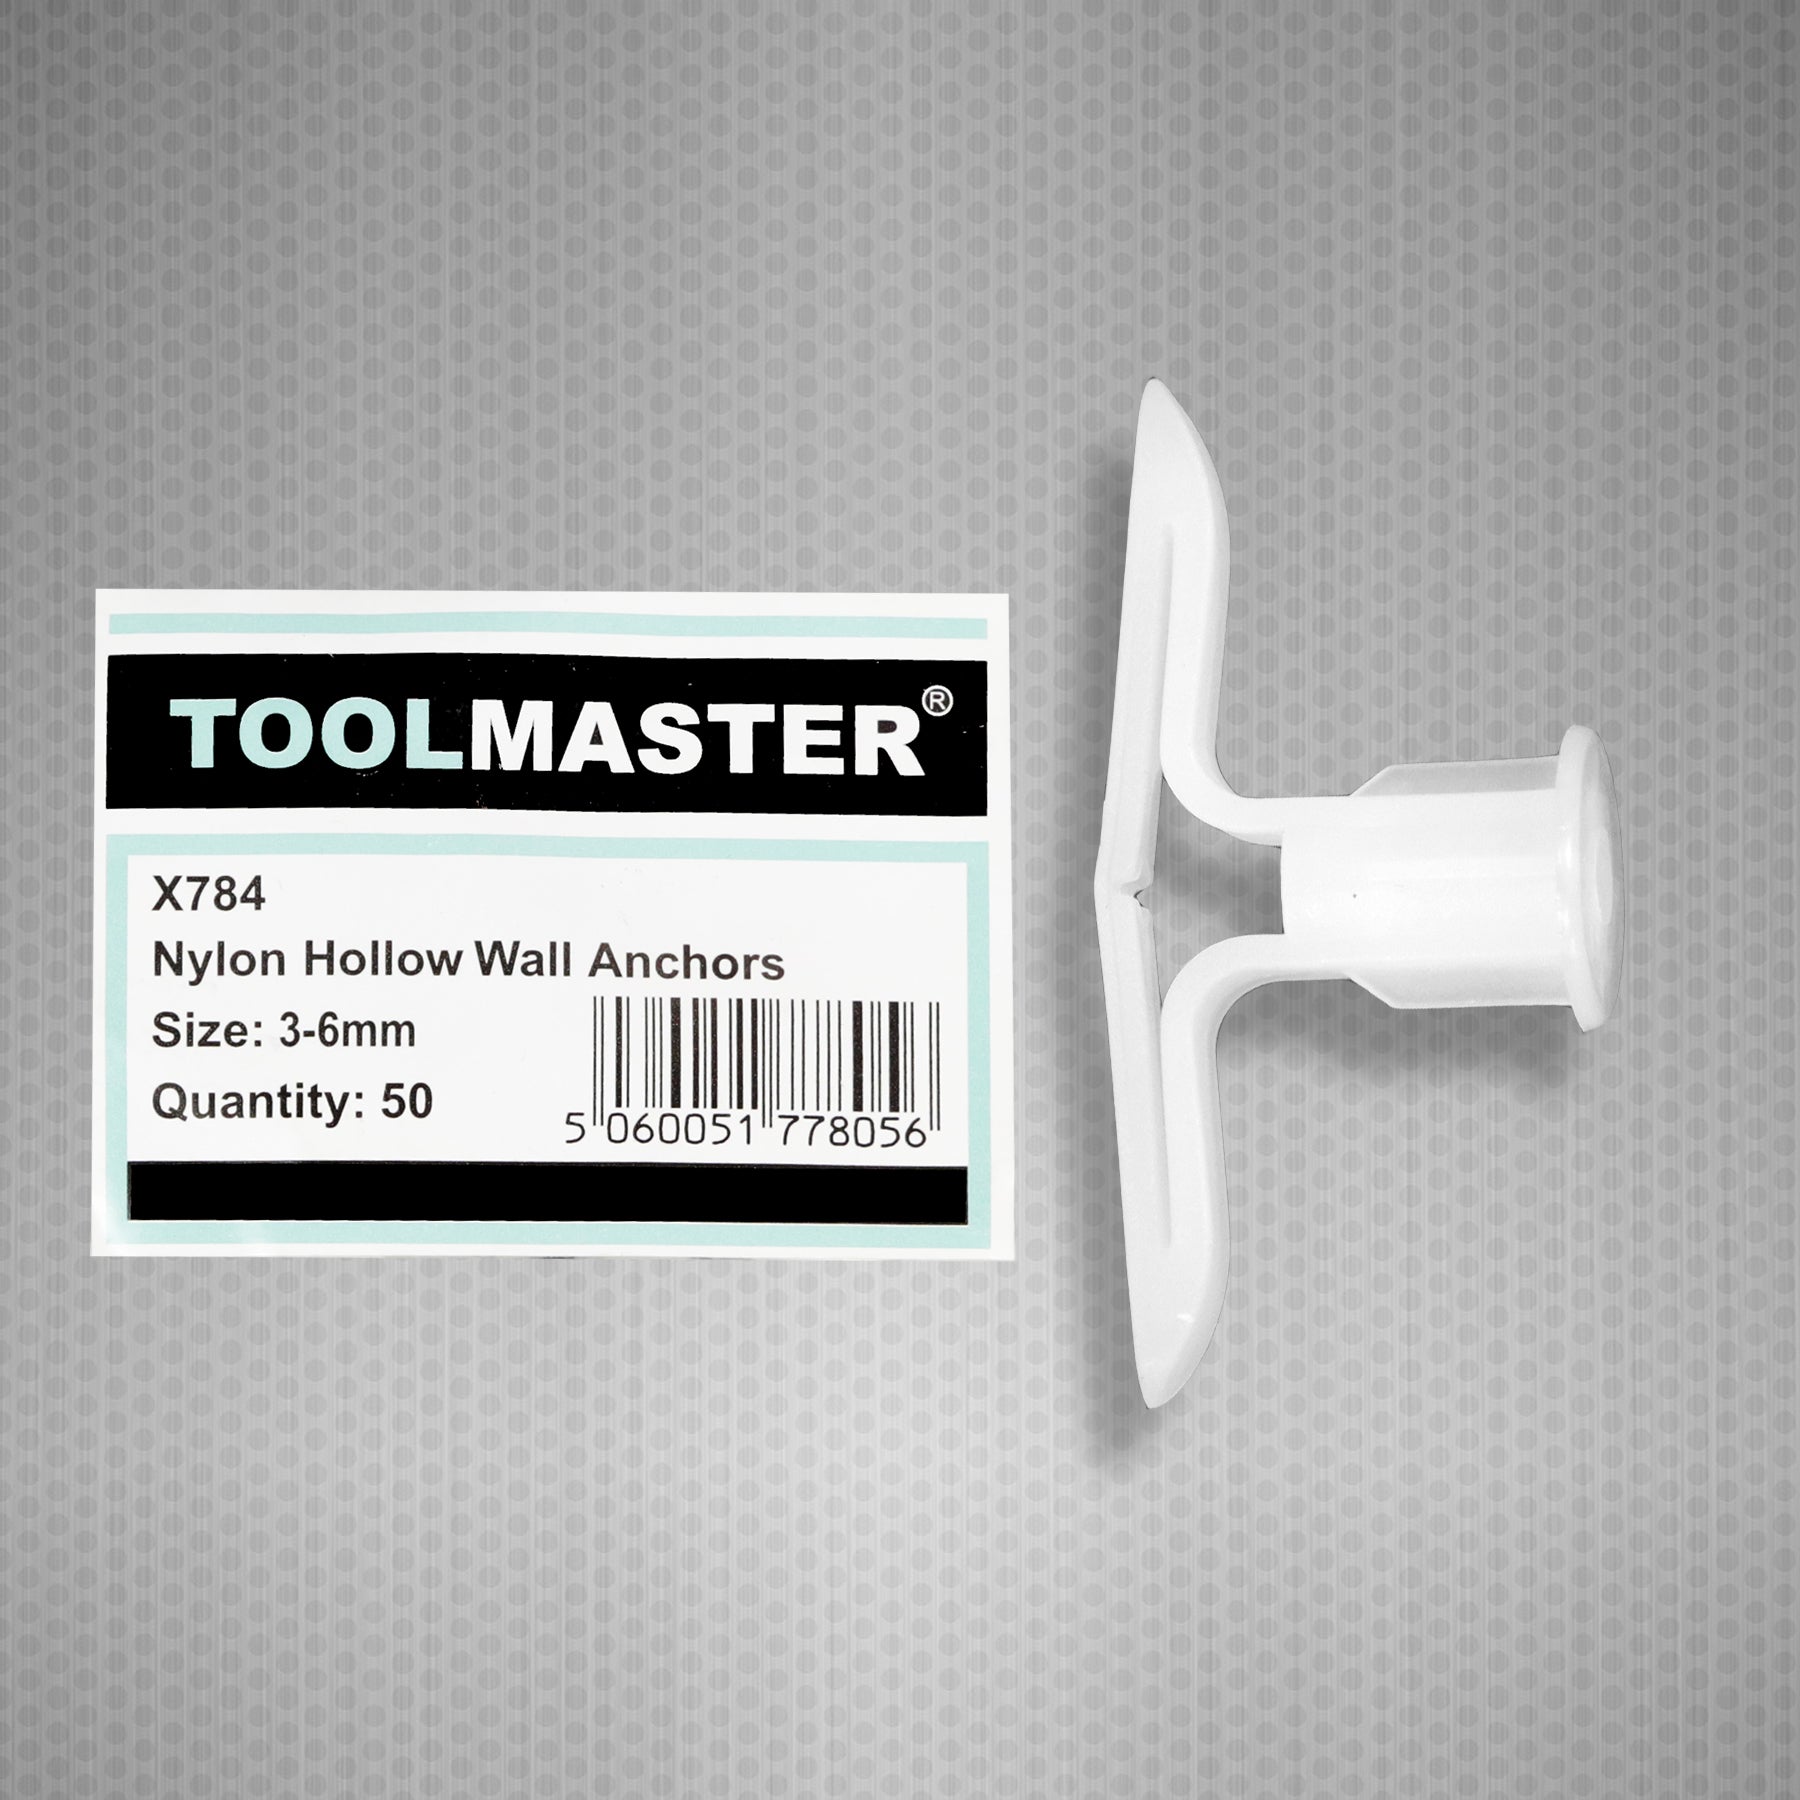 Toolmaster Nylon Hollow Wall Anchors - Size 3-6mm